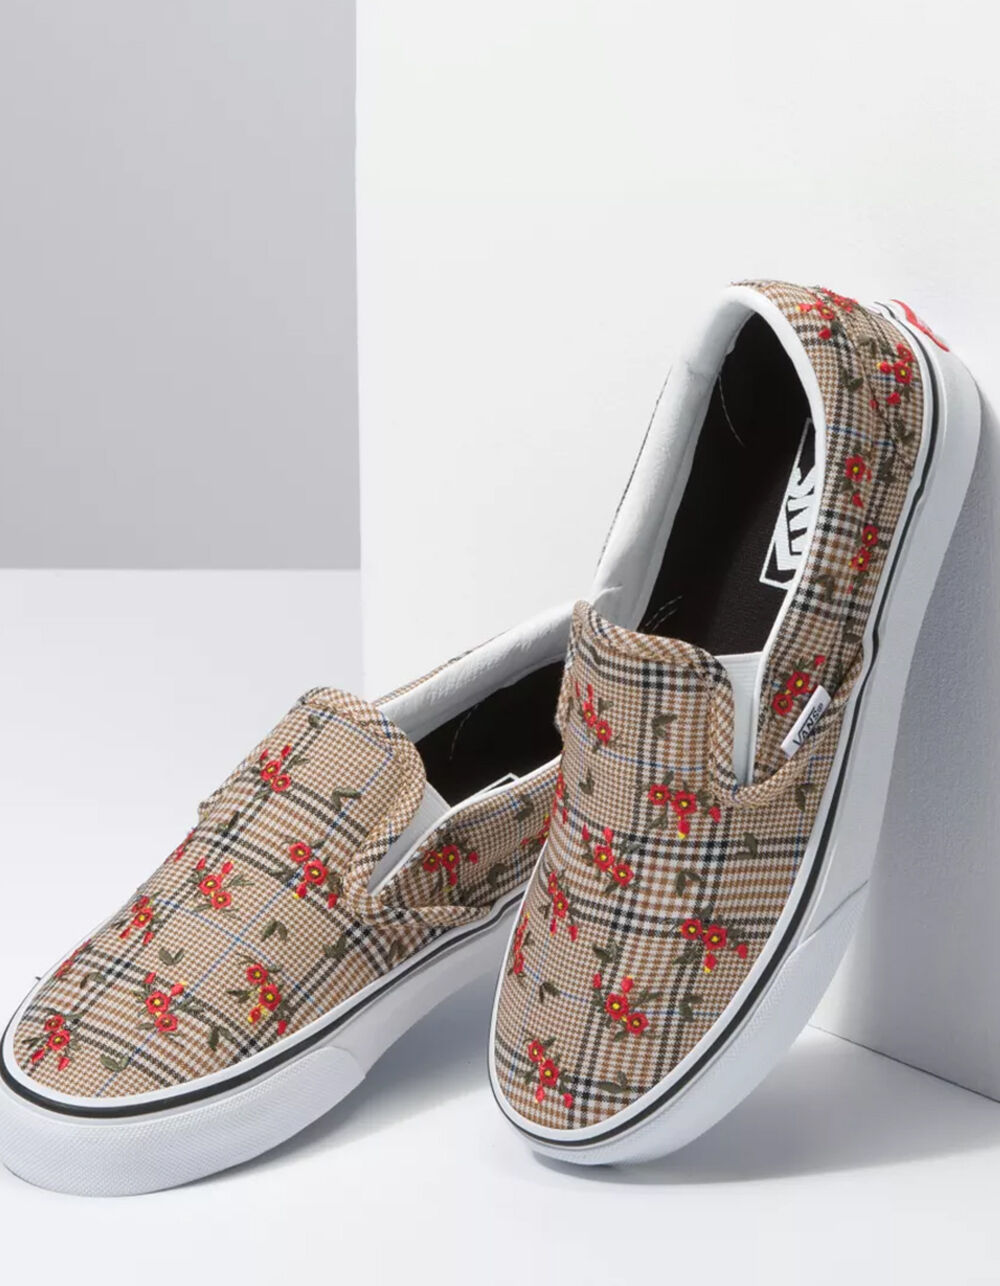 VANS Glen Plaid Floral Classic Slip-On Womens Shoes - EMBROIDERY/TRUE ...